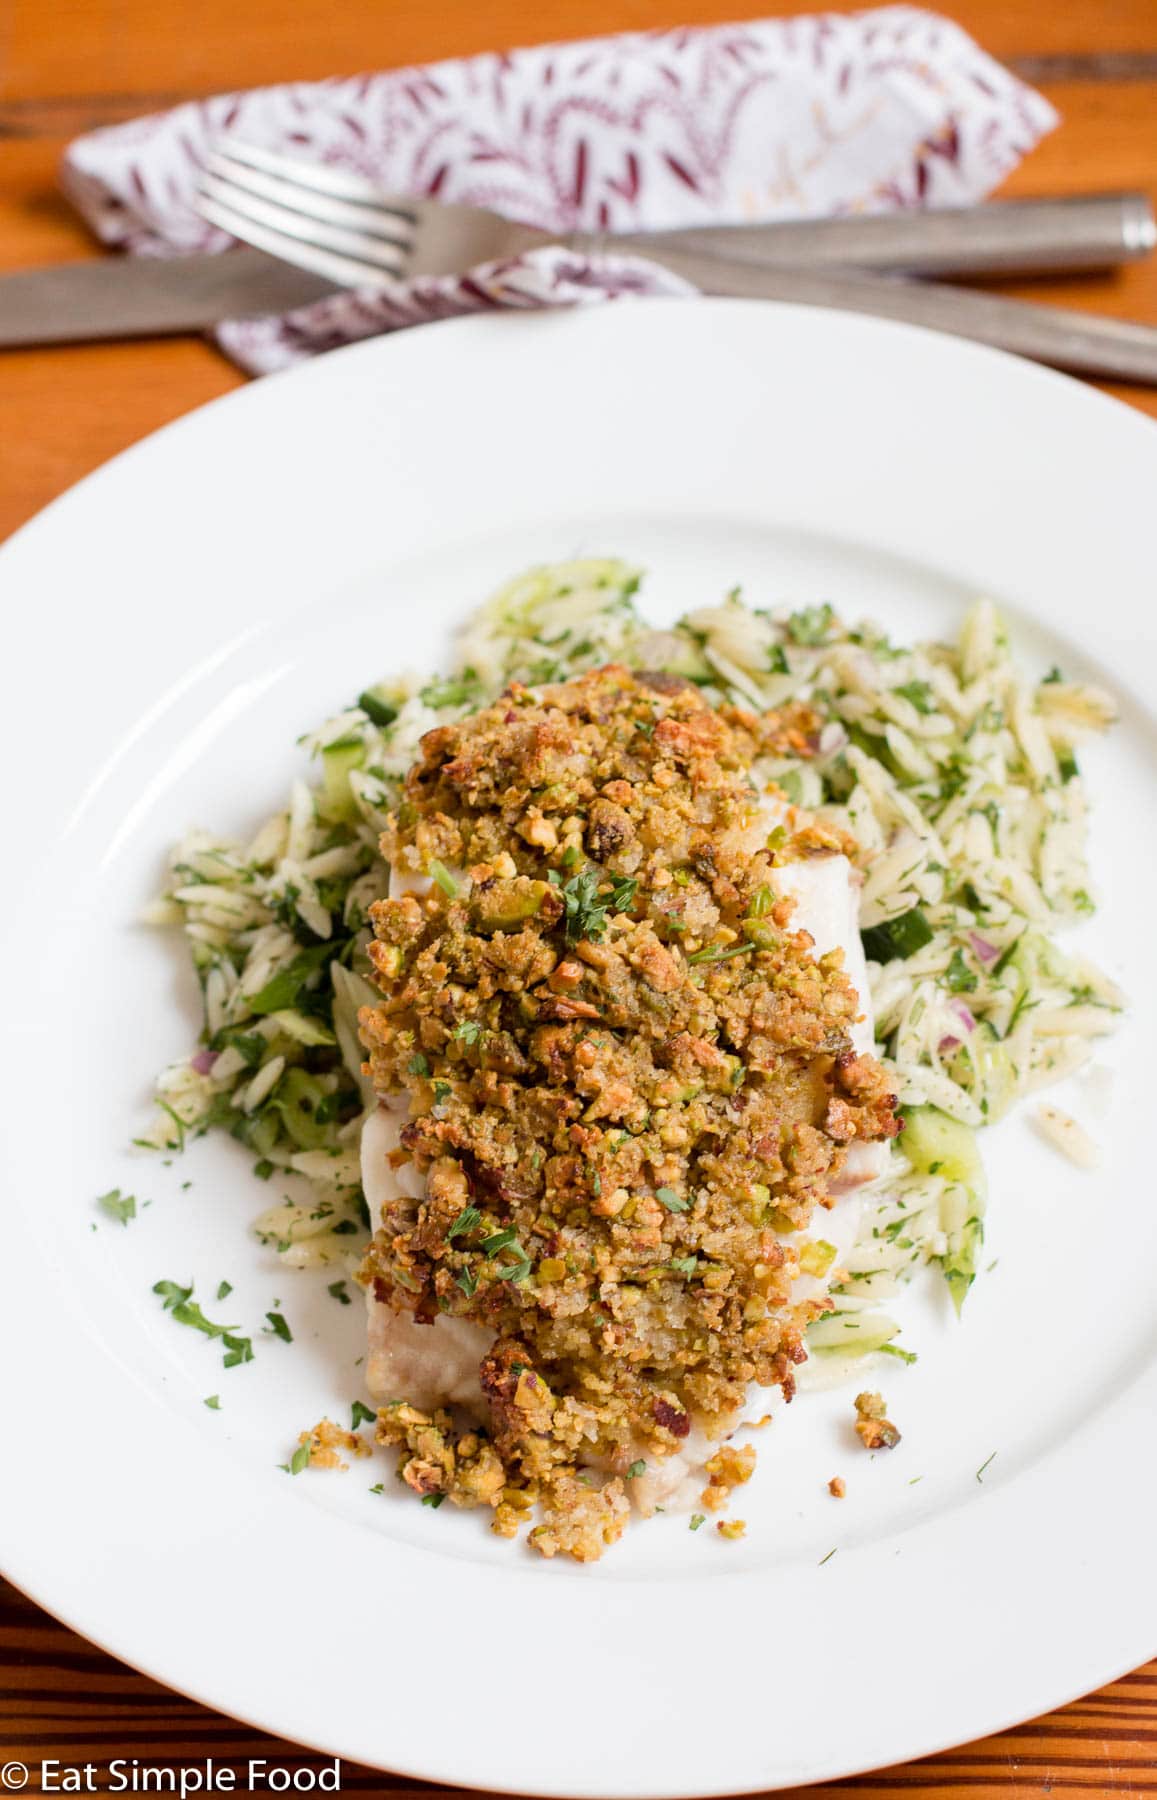 A cooked chicken Breast coated in browned processed pecans. Garnished with parsley and on a bed of orzo with herbs on a white plate.